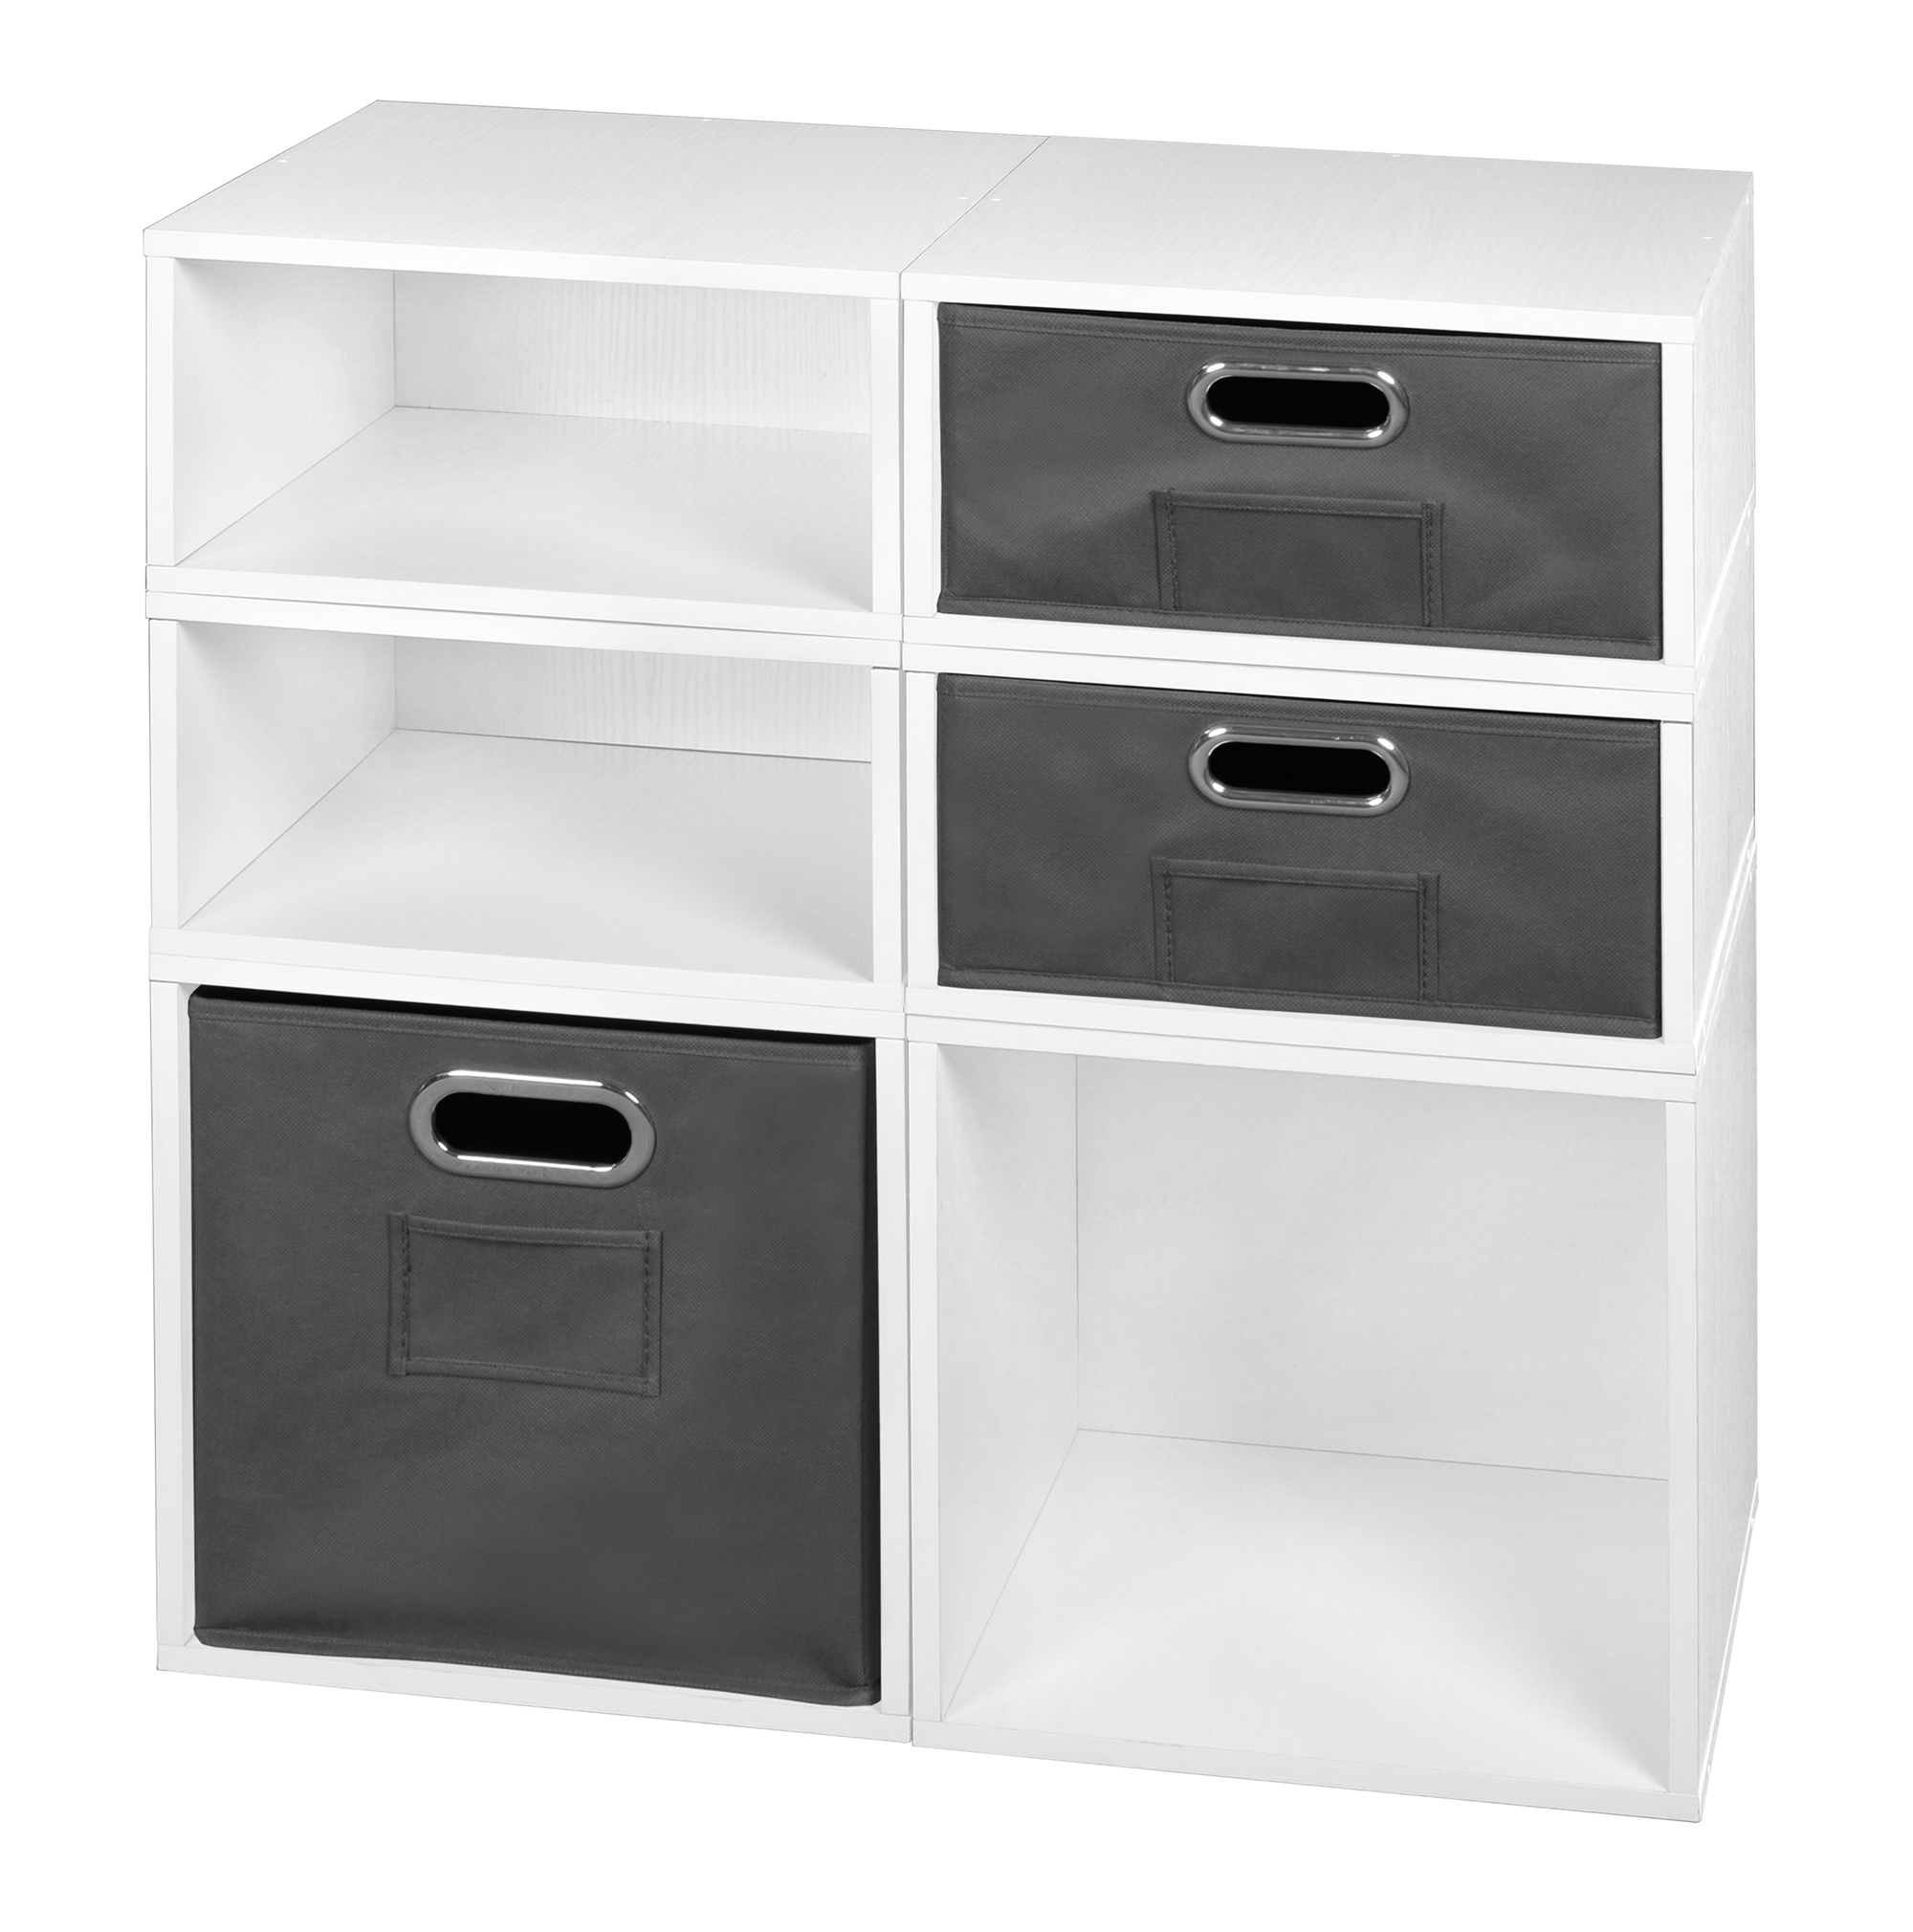 Niche Cubo Storage Set- 2 Full Cubes/4 Half Cubes with Foldable Storage Bins- White Wood Grain/Grey - image 1 of 8